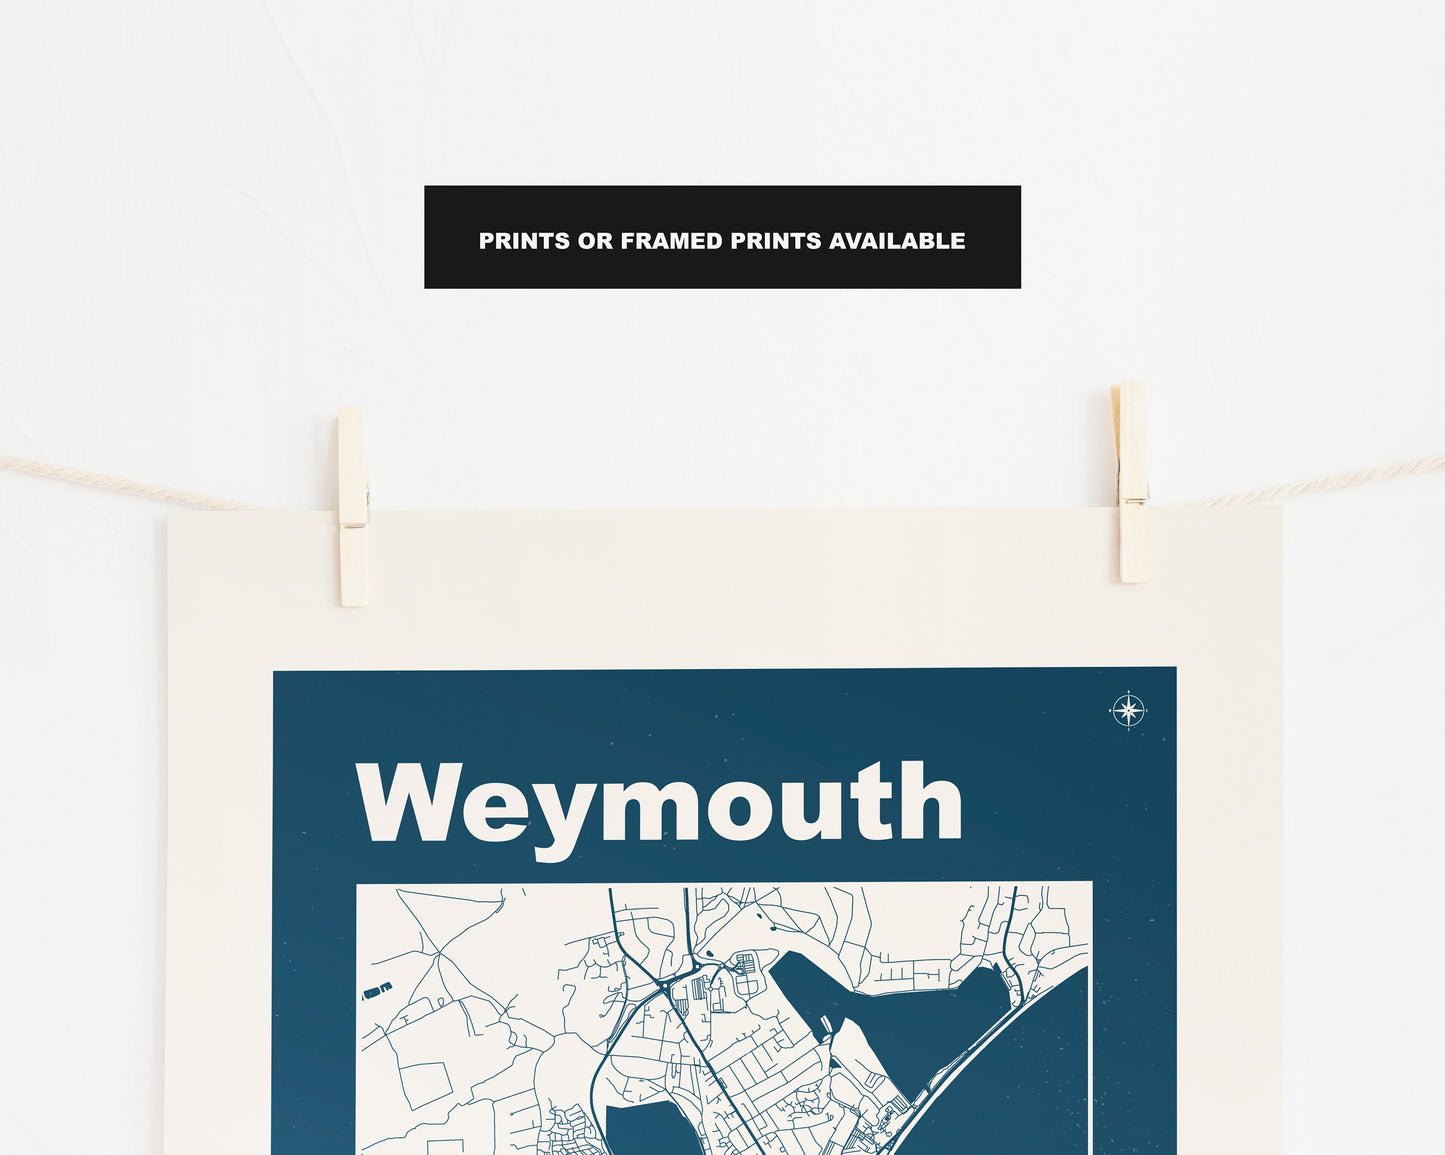 Weymouth Print - Map Print - Mid Century Modern  - Retro - Vintage - Contemporary - Weymouth Print - Map - Map Poster - Gift - Dorset